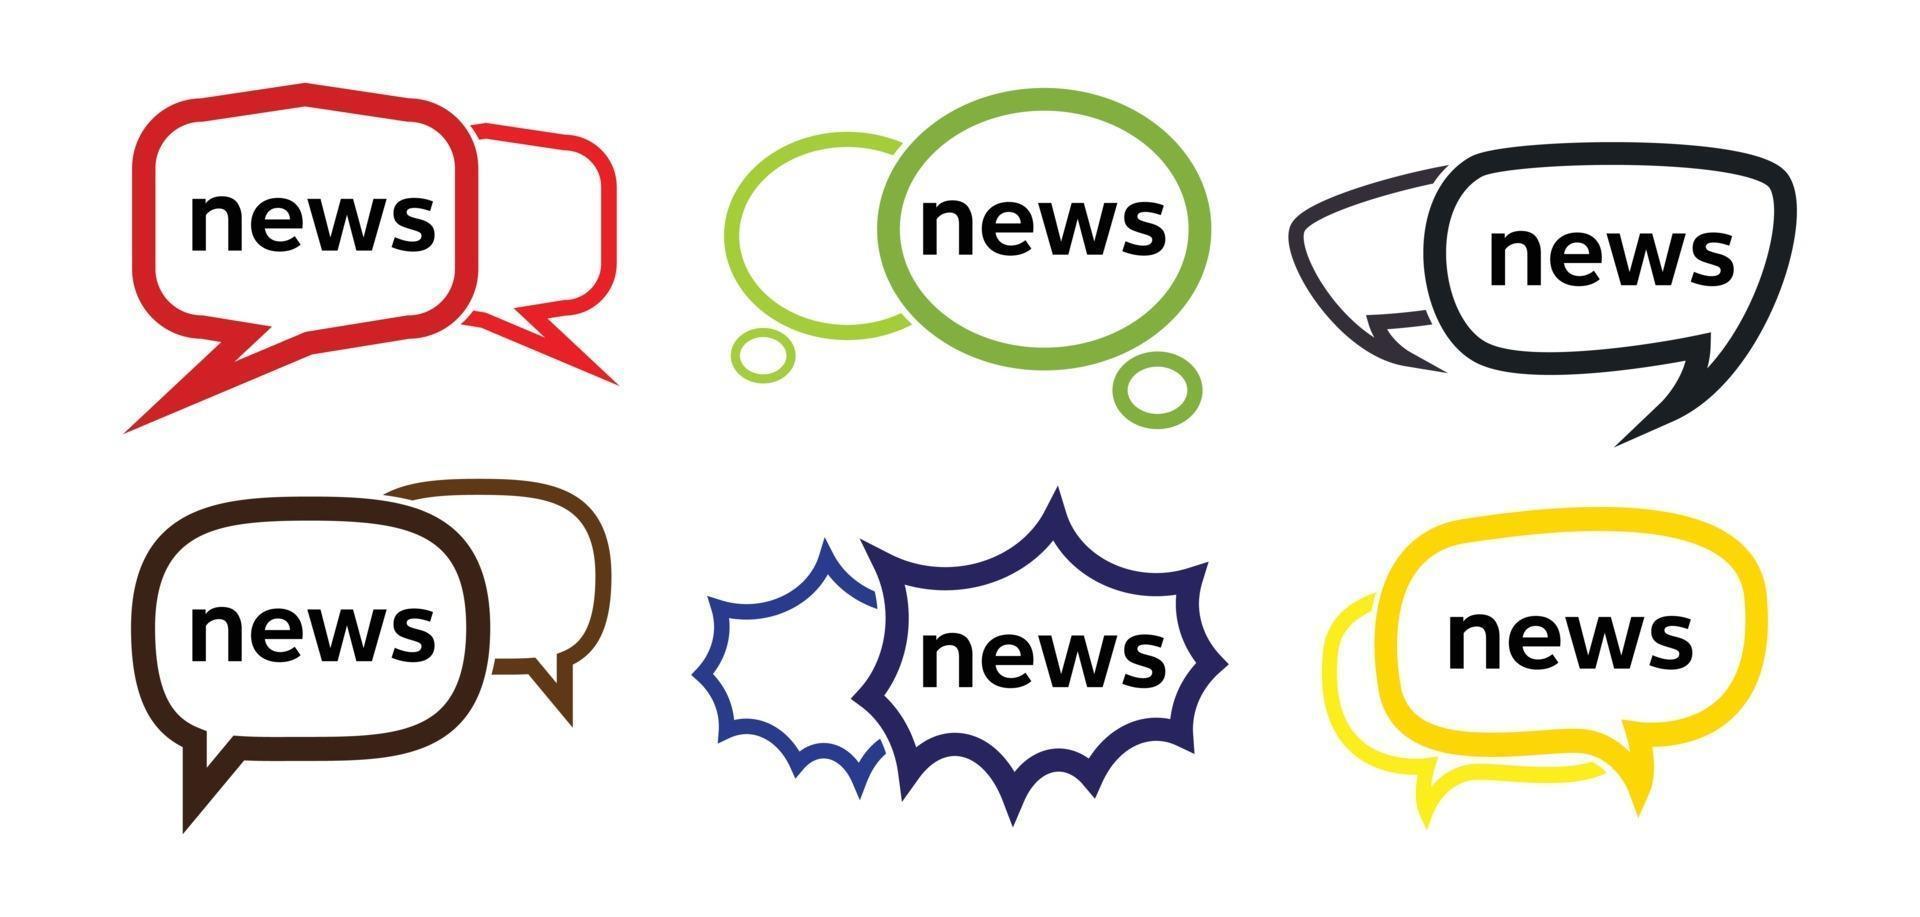 News word and speech bubble vector